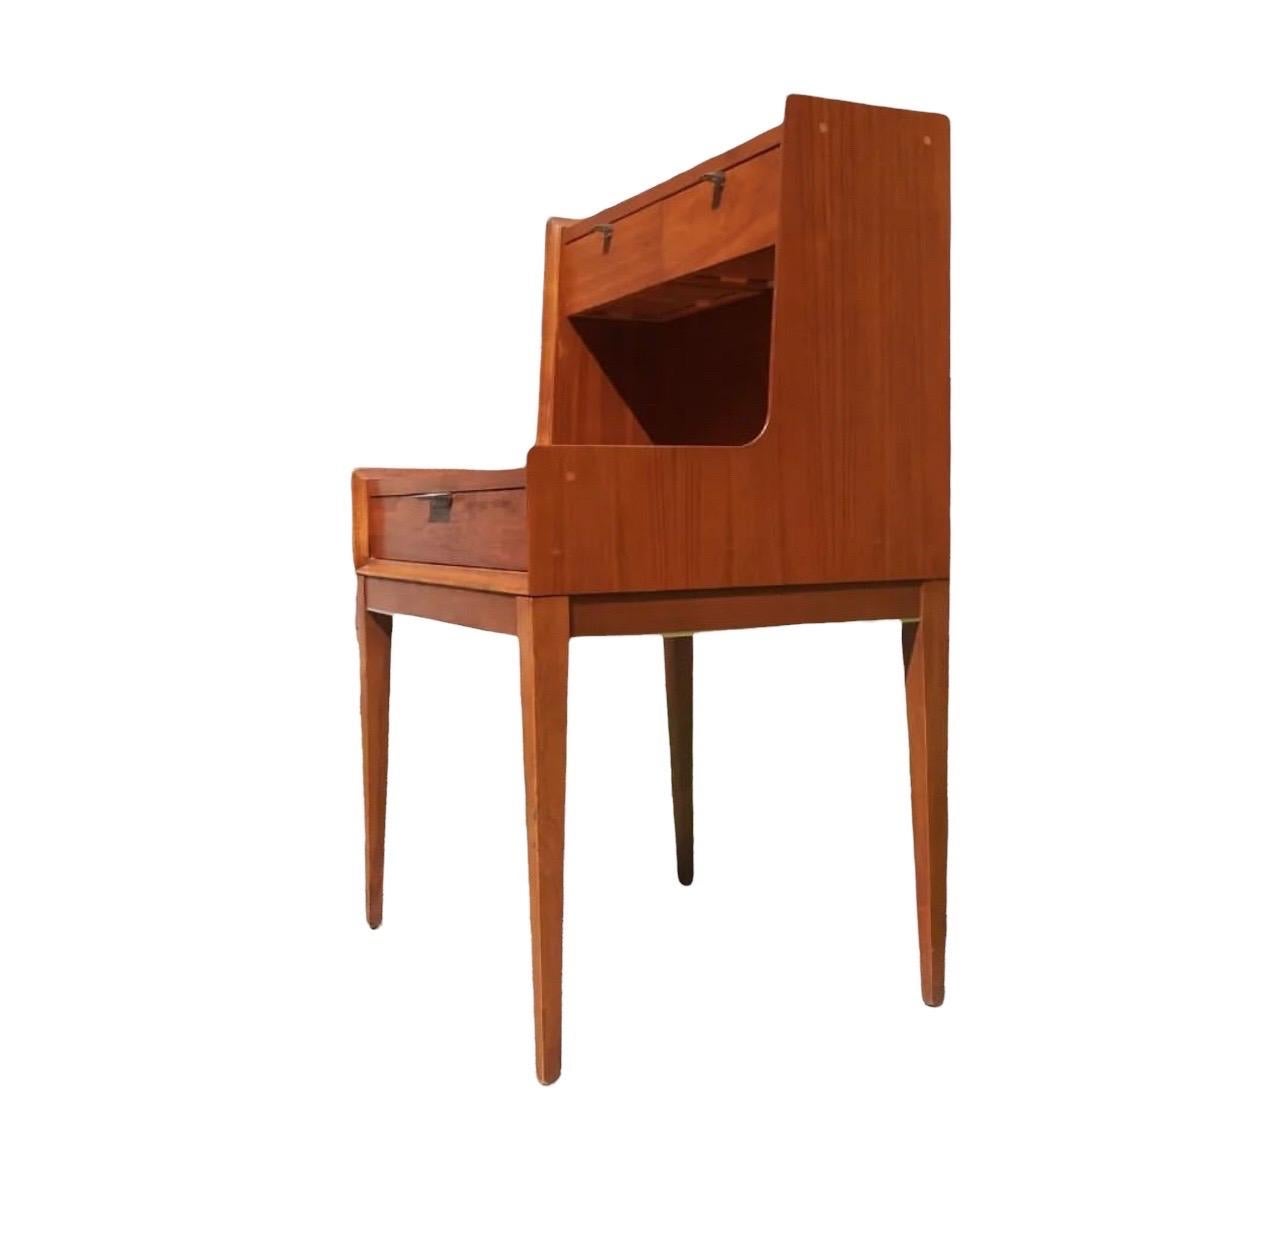 Vintage side table designed by Arthur Umanoff featuring tall legs and three drawers in a two-tier fashion. Whether its the aesthetic wood finish or elegant appearance these nightstands will make a great addition to any home or office space.